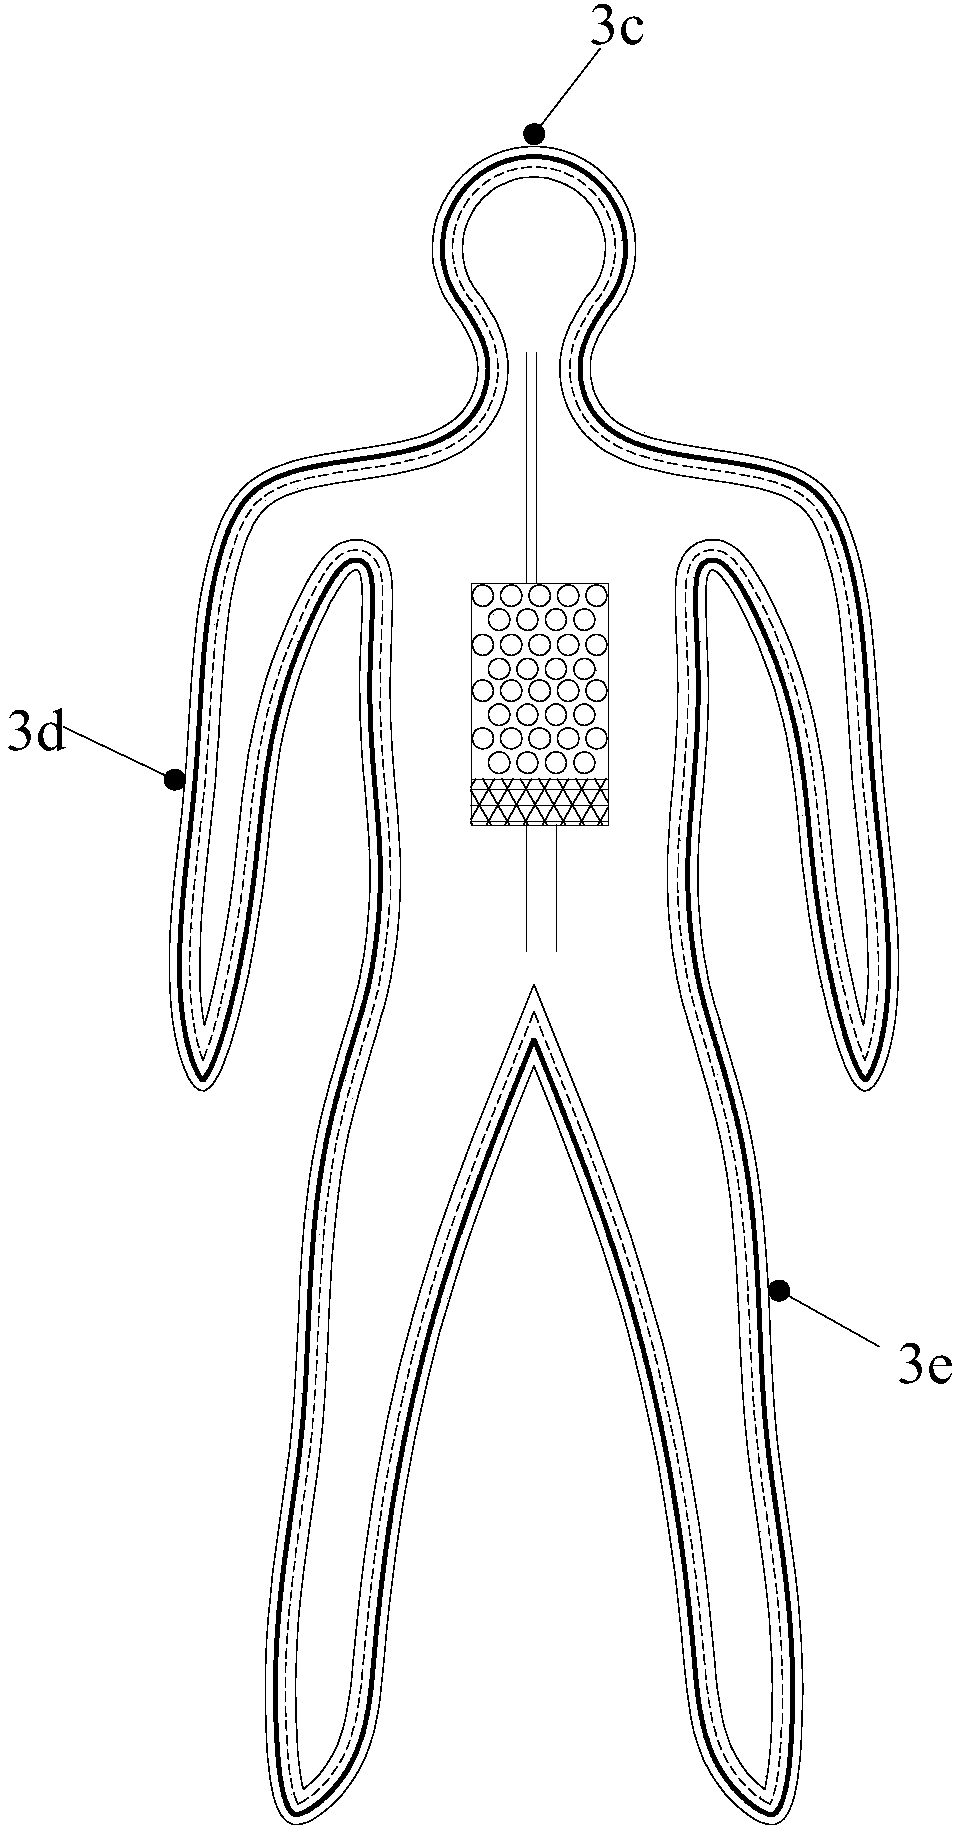 A new thermal manikin system